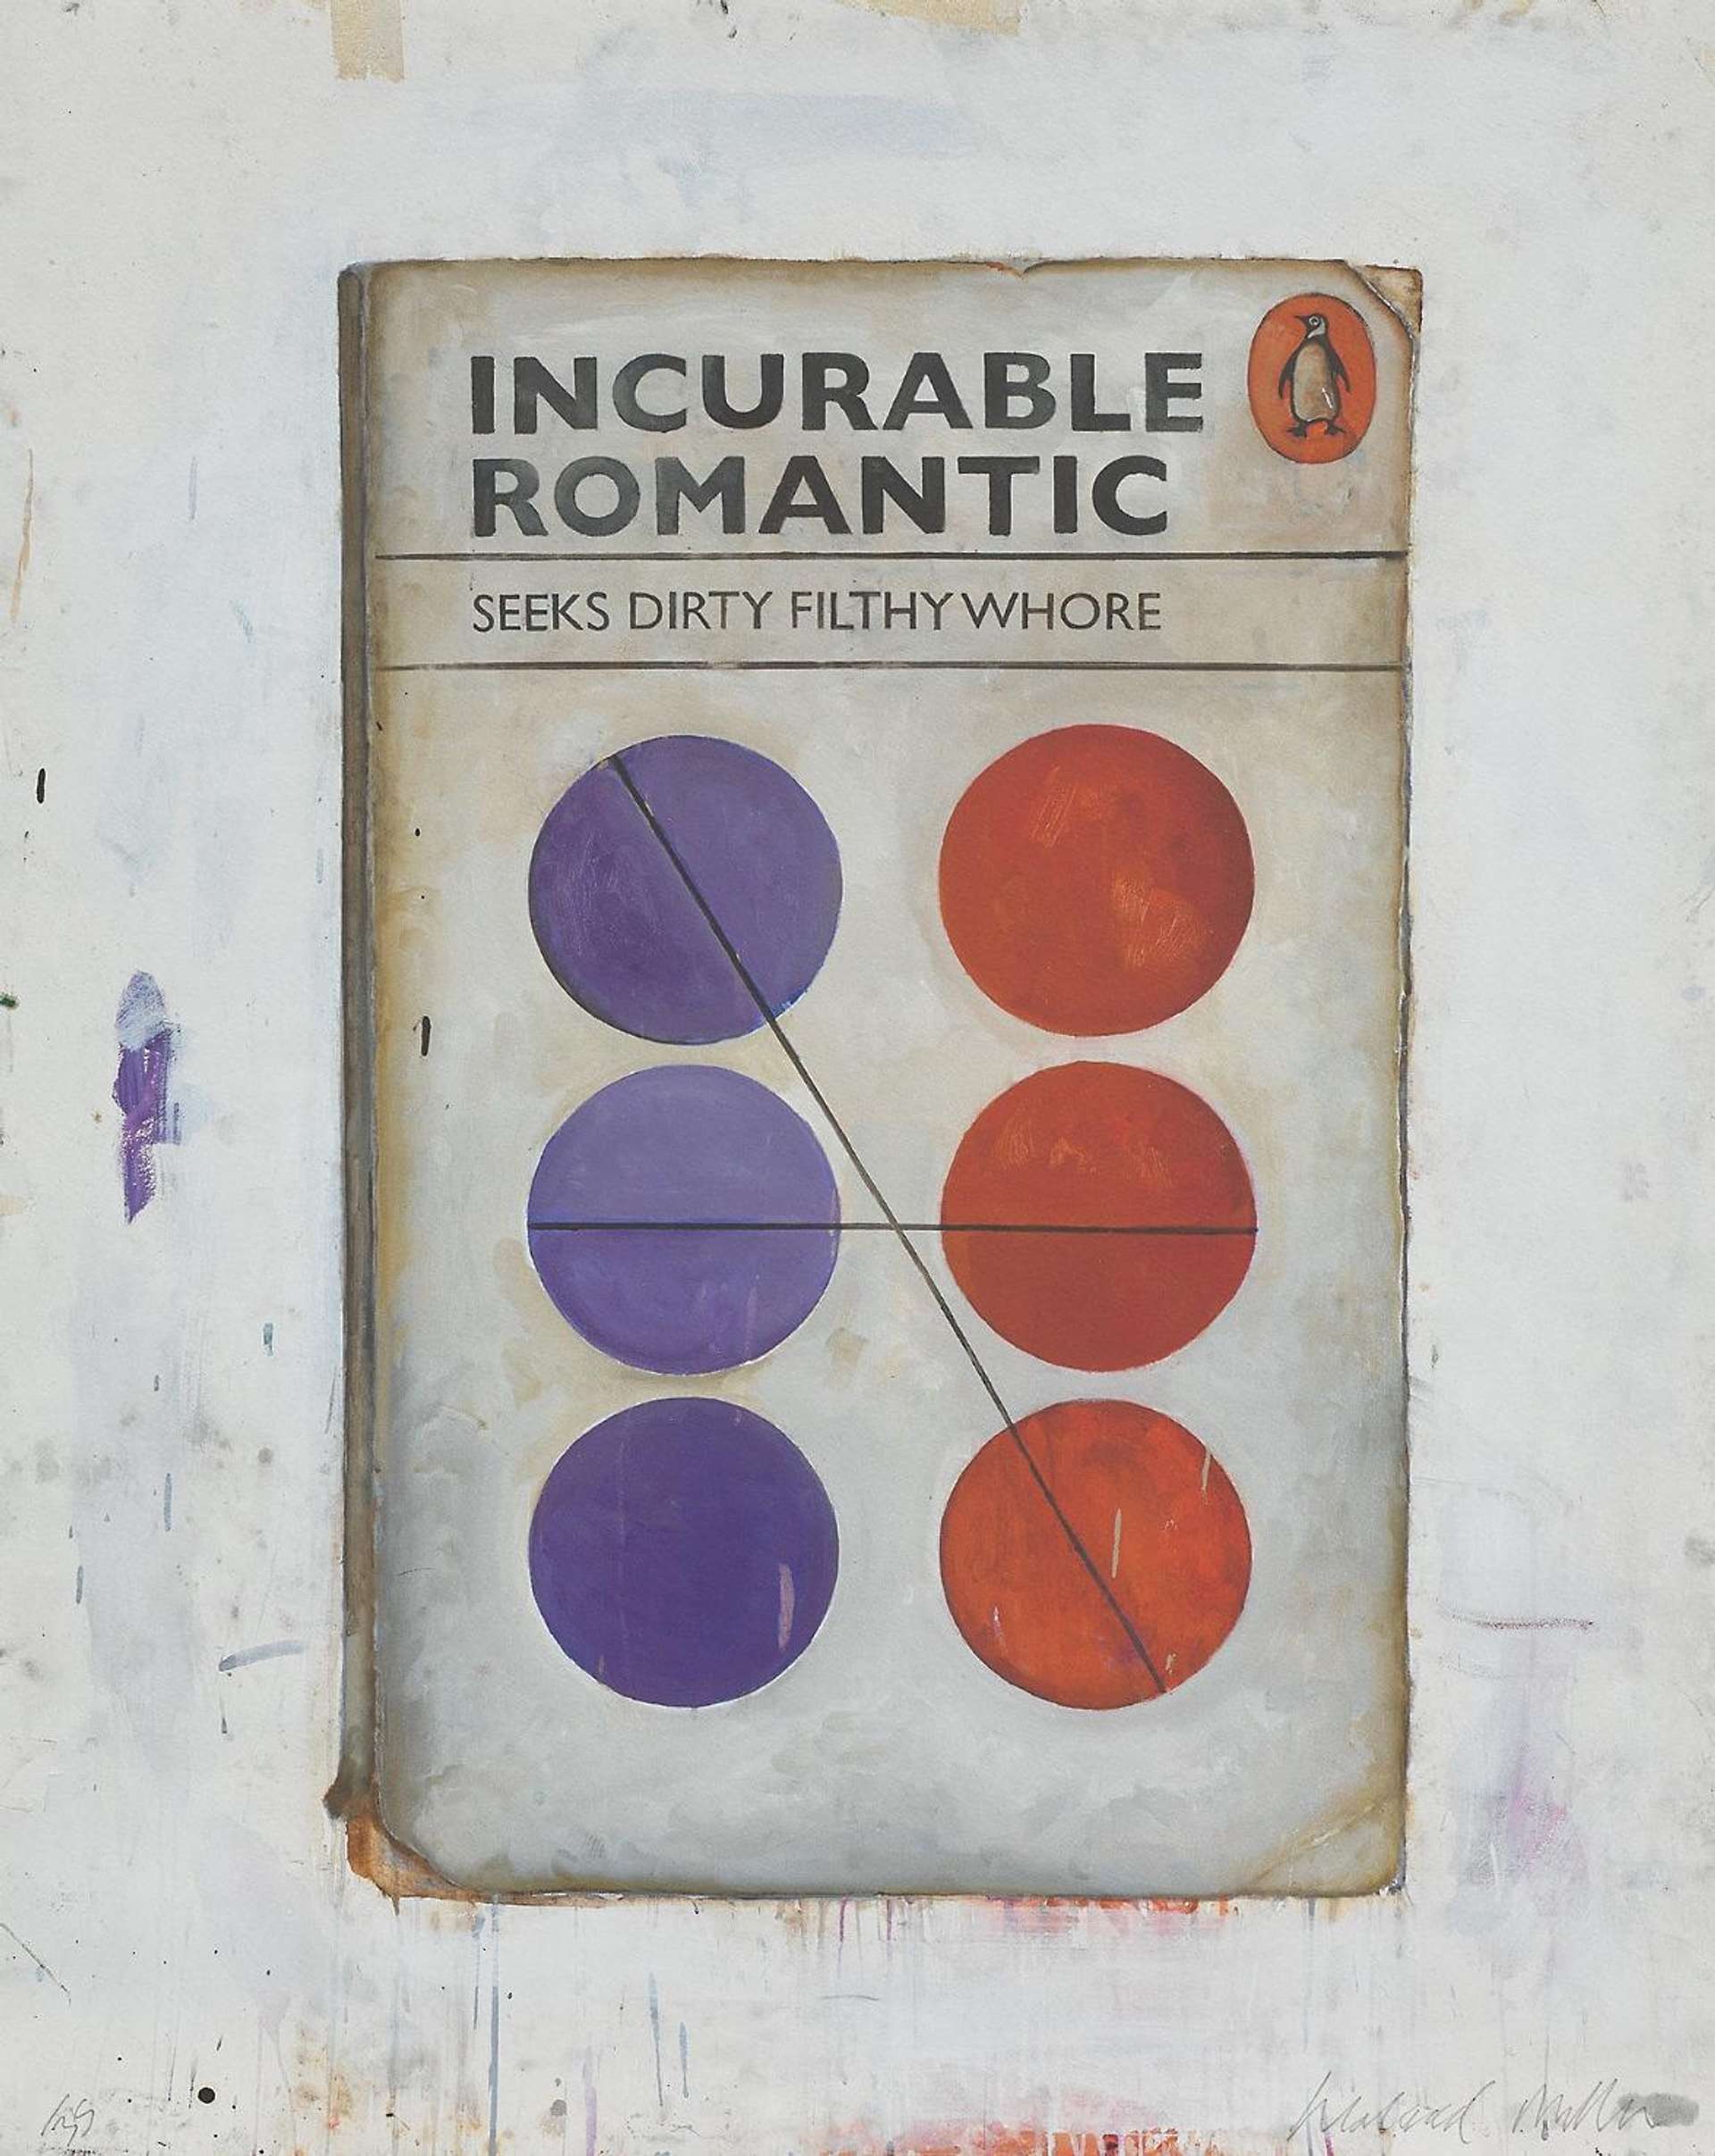 Incurable Romantic Seeks Dirty Filthy Whore by Harland Miller